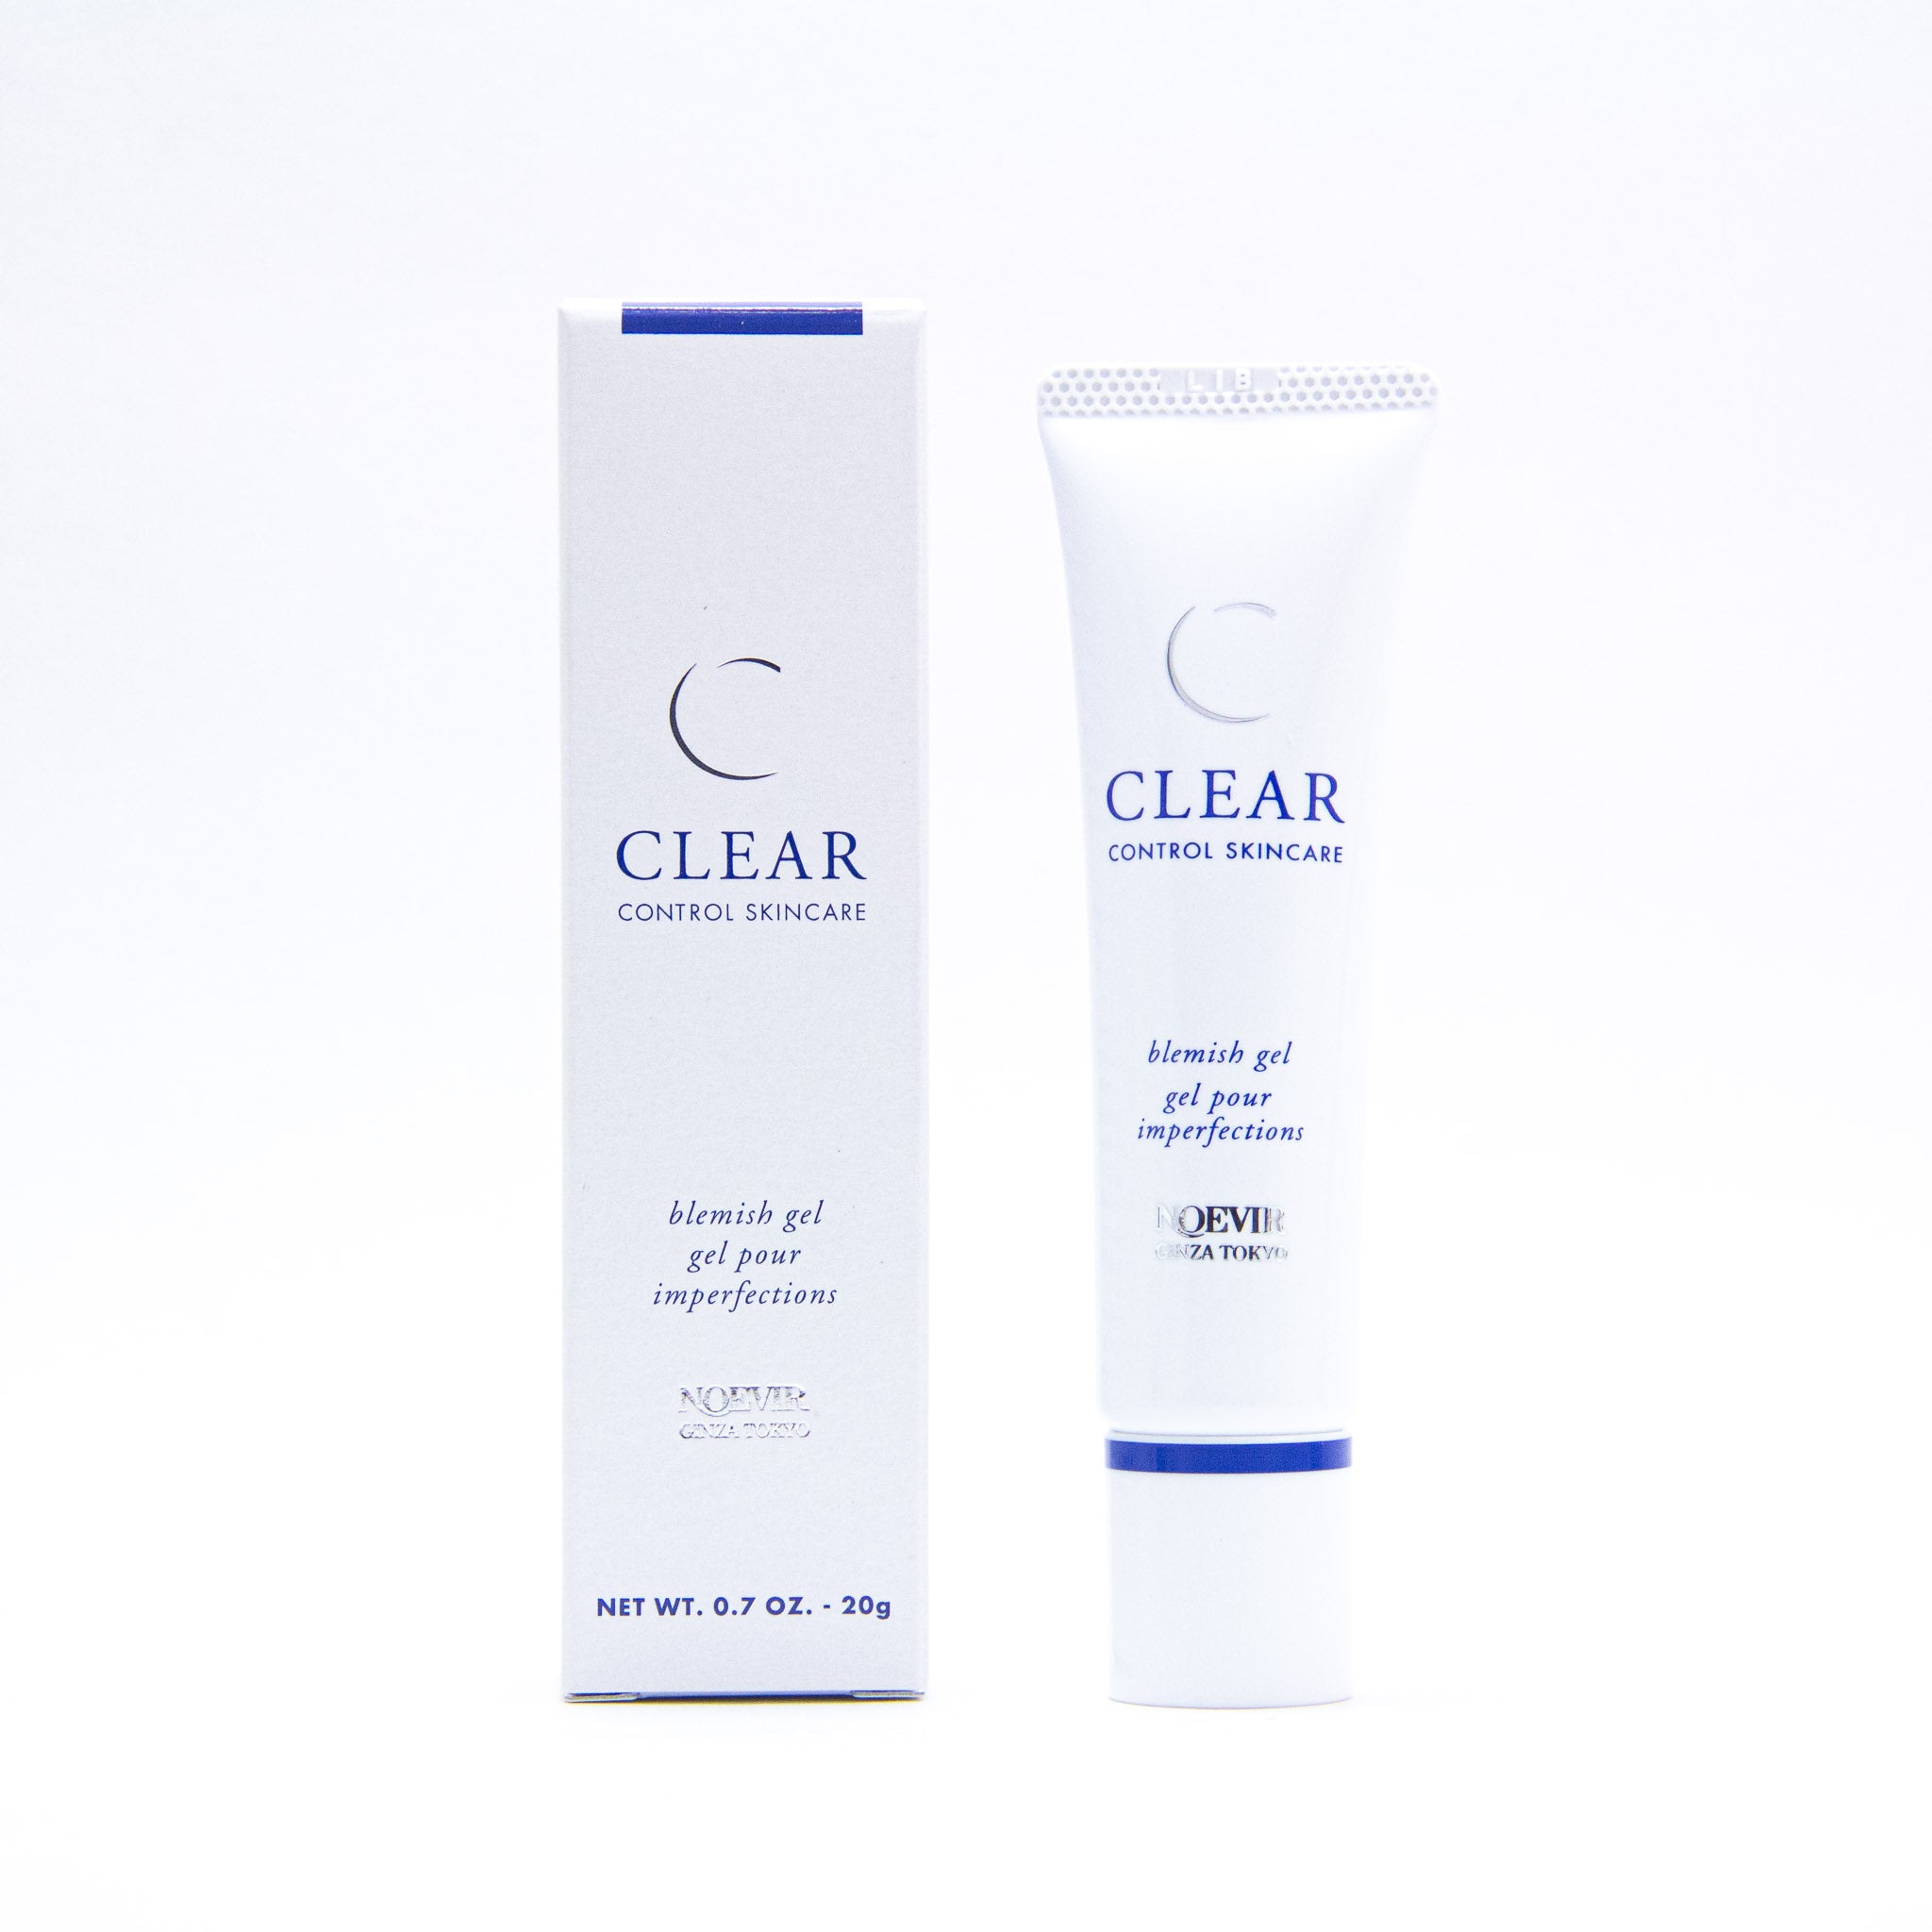 Noevir Clear Control Blemish Gel, 0.7 oz:   The Blemish Gel is an oil-free, clear gel formula that quickly penetrates the skin for maximum effectiveness. The clear gel allows for invisible protection day or night, to treat blemishes and help prevent breakouts.